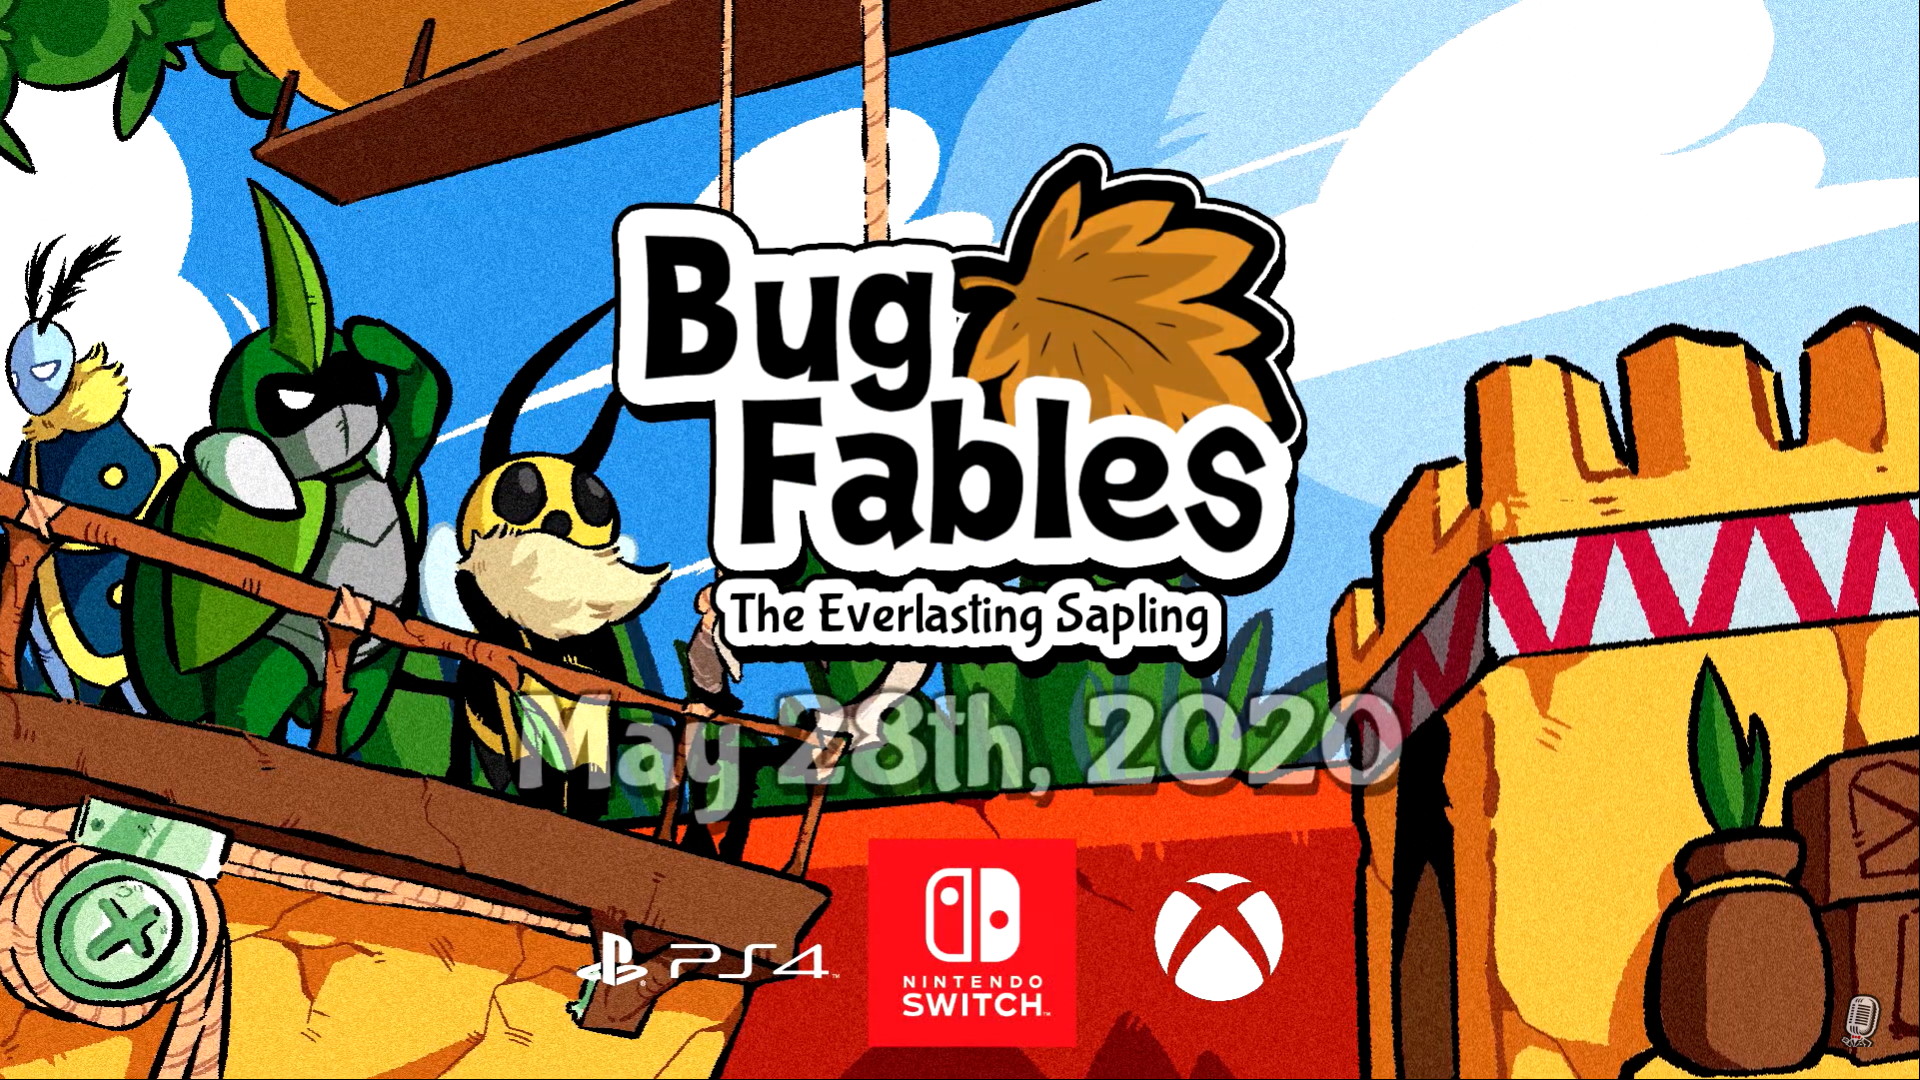 Adventure RPG in Paper Style, Bug Fables: The Everlasting Sapling will be launching on May 28